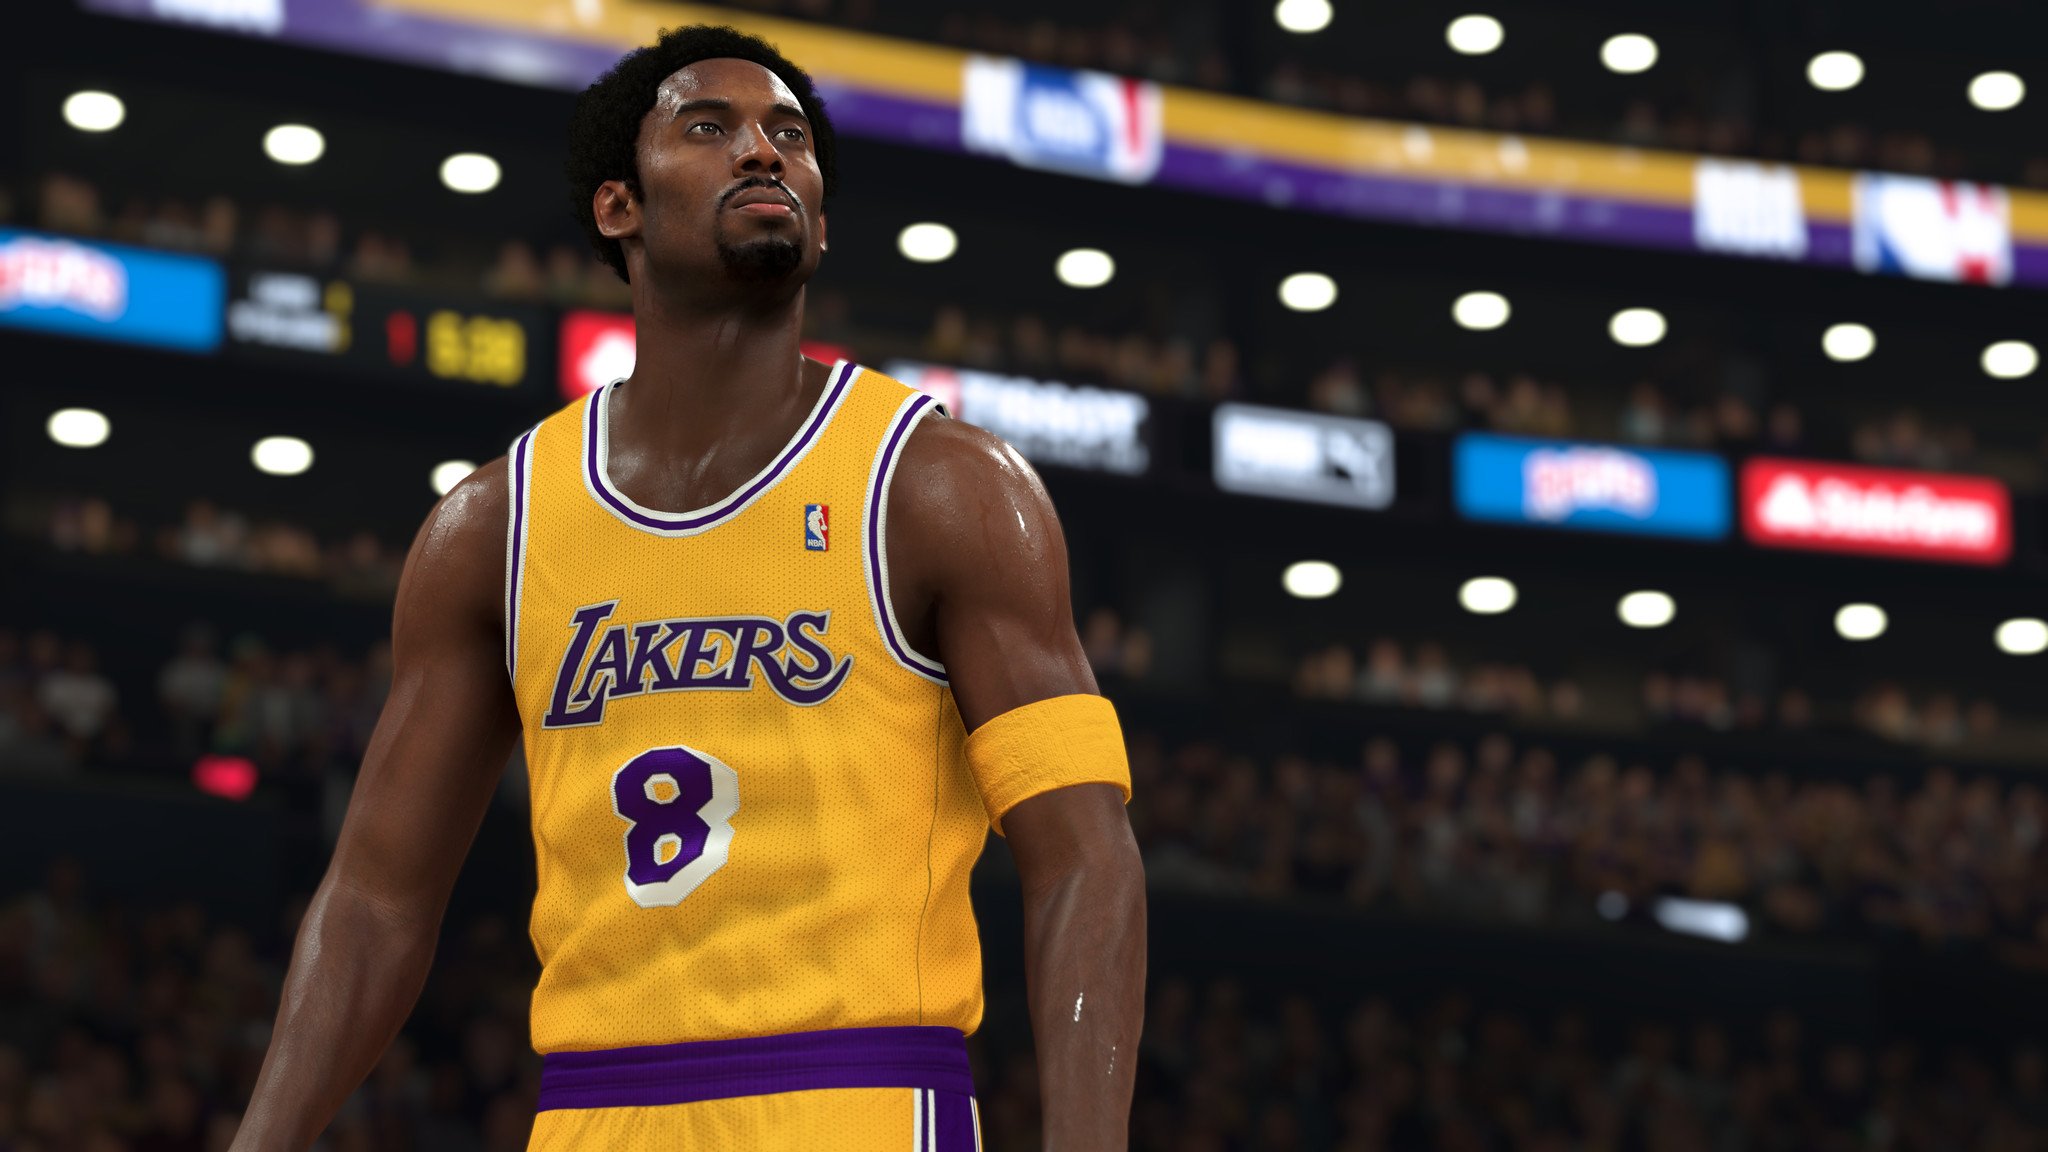 Nba 2k21 For Ps4 Review Current Gen Version Offers Some Updates But Not Enough Android Central